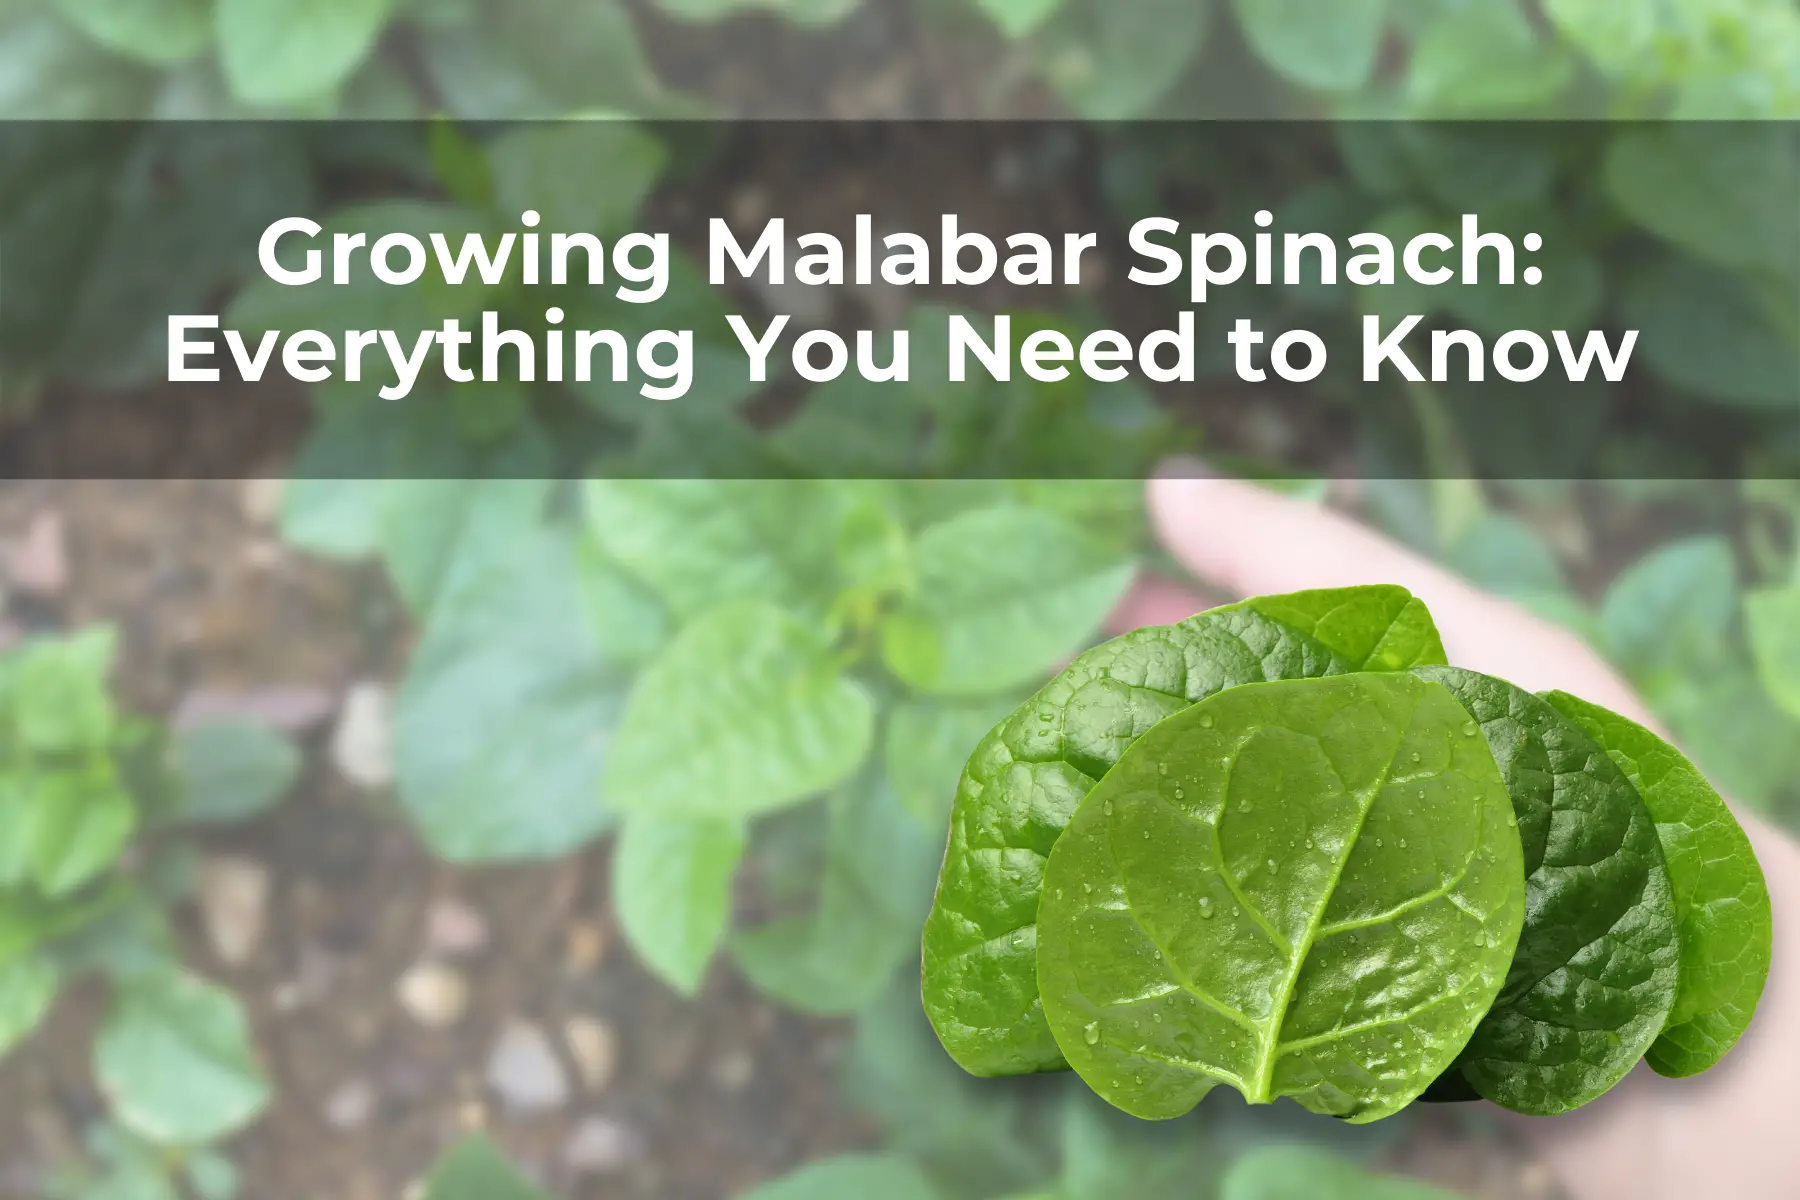 Growing Malabar Spinach: Everything You Need to Know